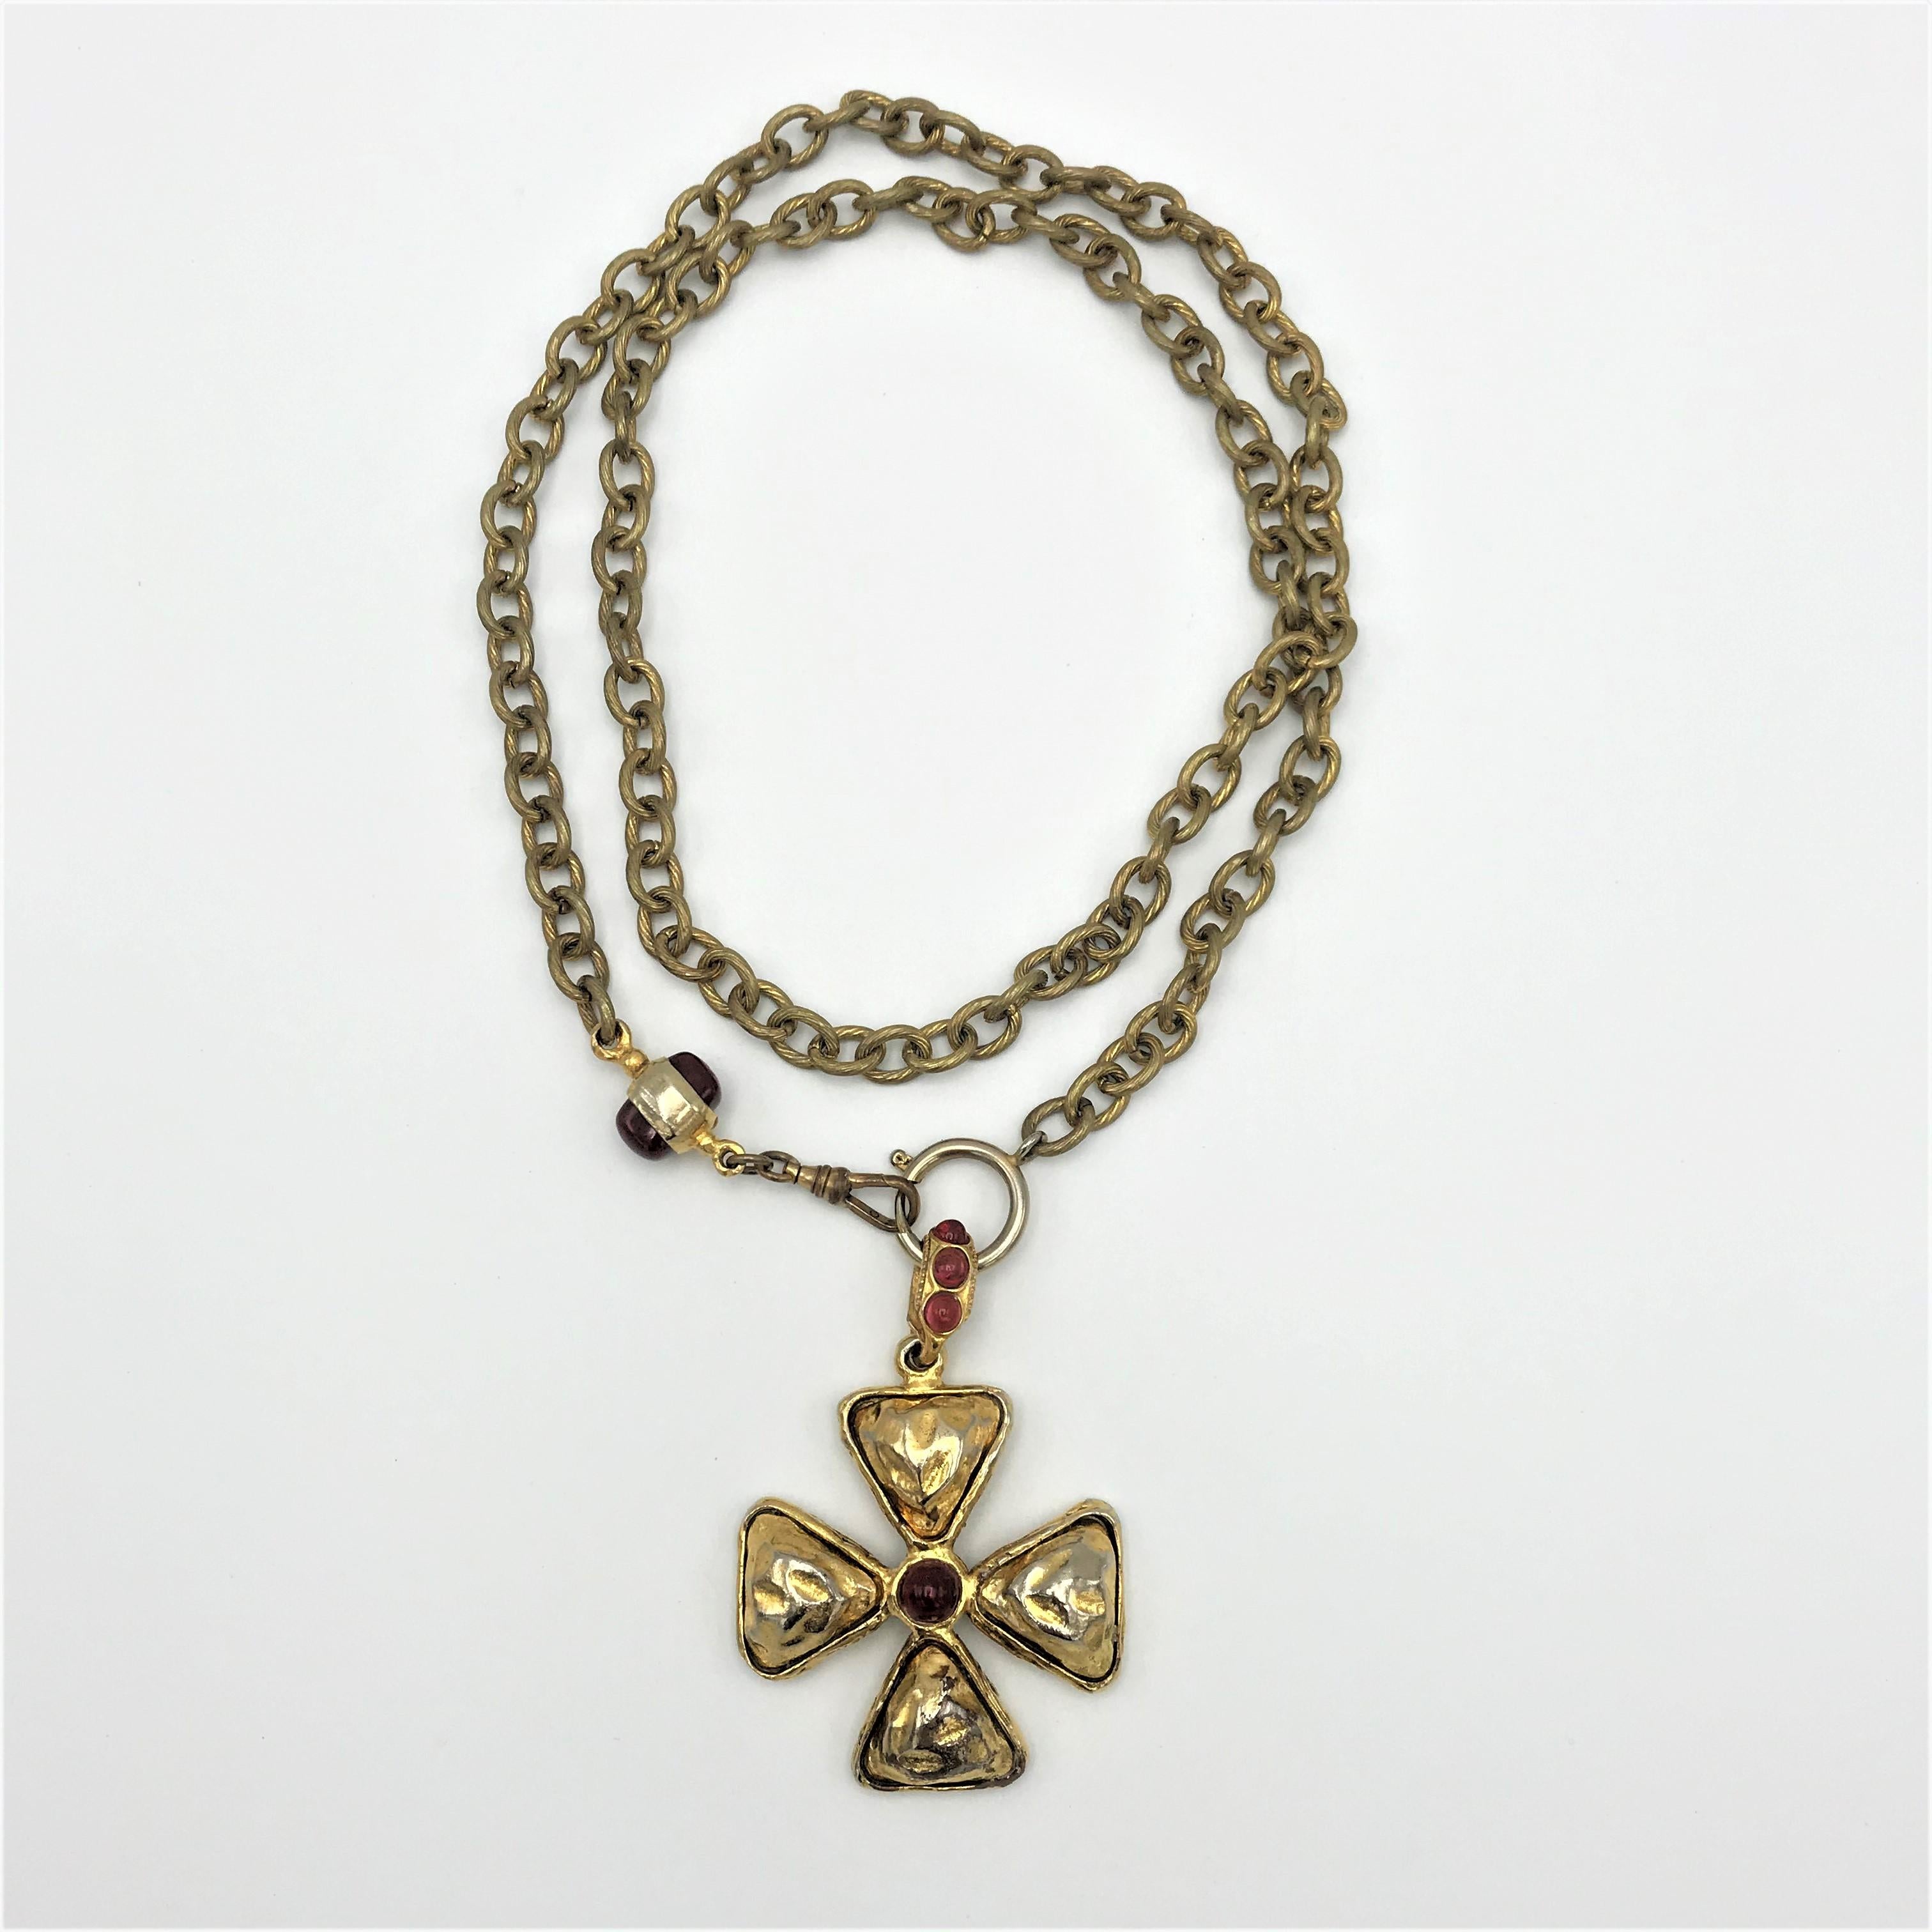 Artist Chanel chain with cross pendant,  gold plated sign. 1970/80s